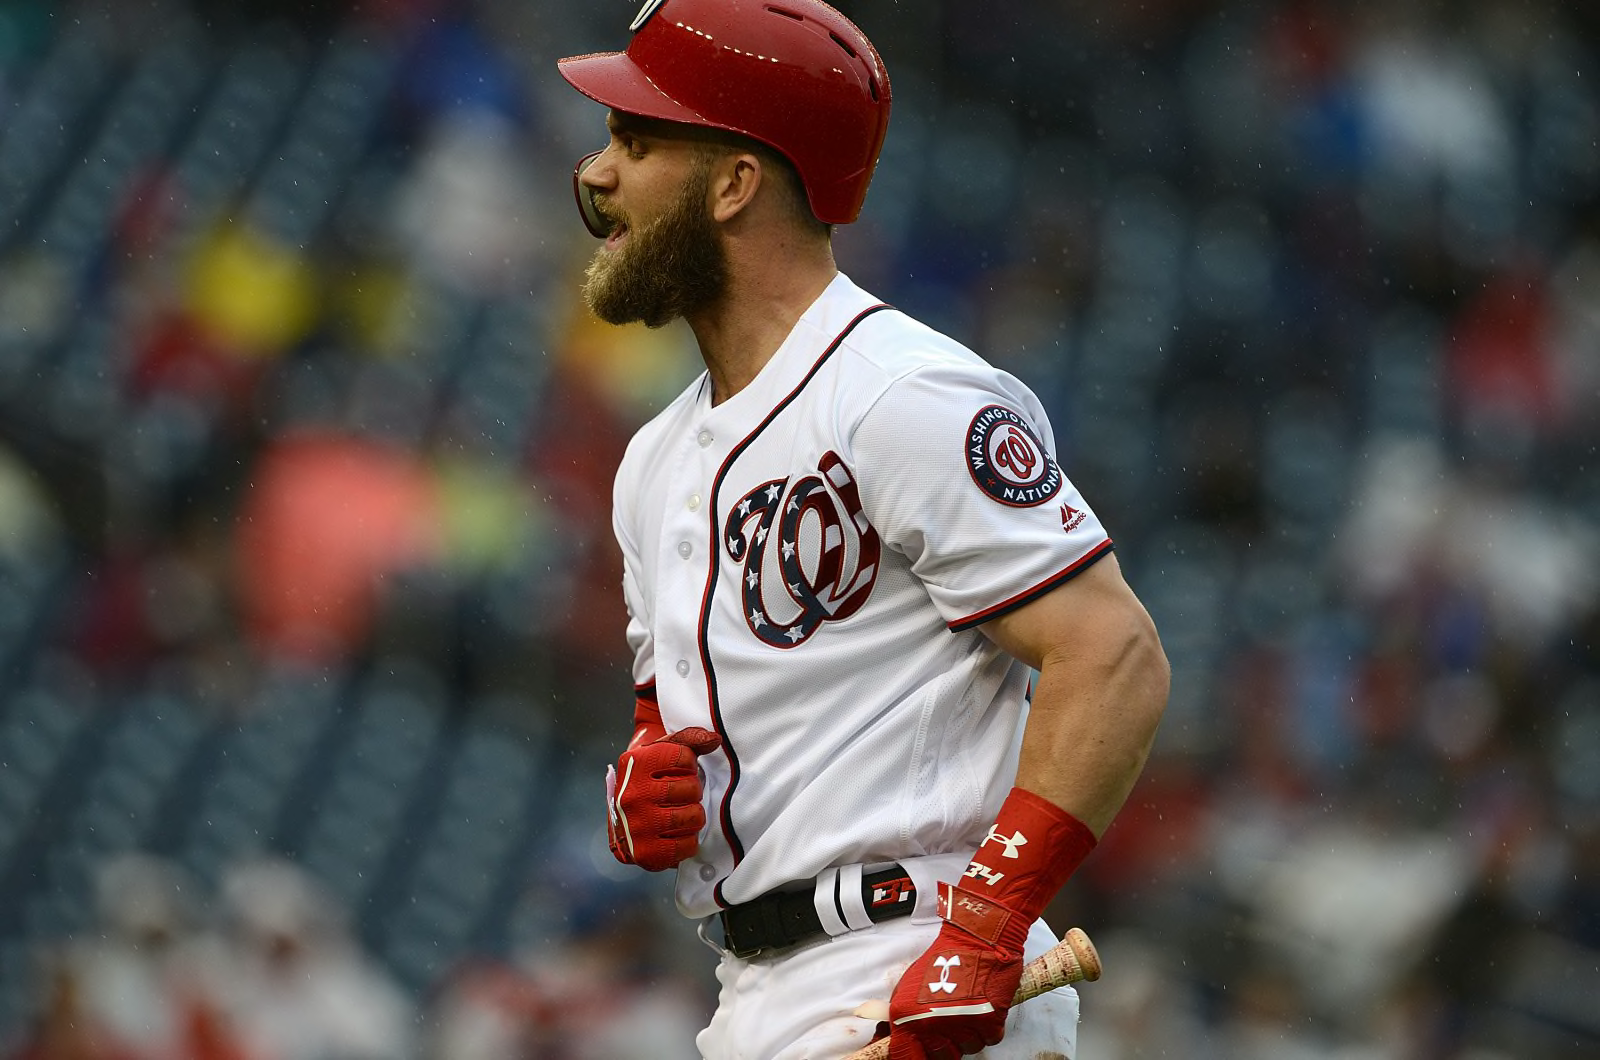 St. Louis Cardinals: Which team should fans want Harper to sign with?